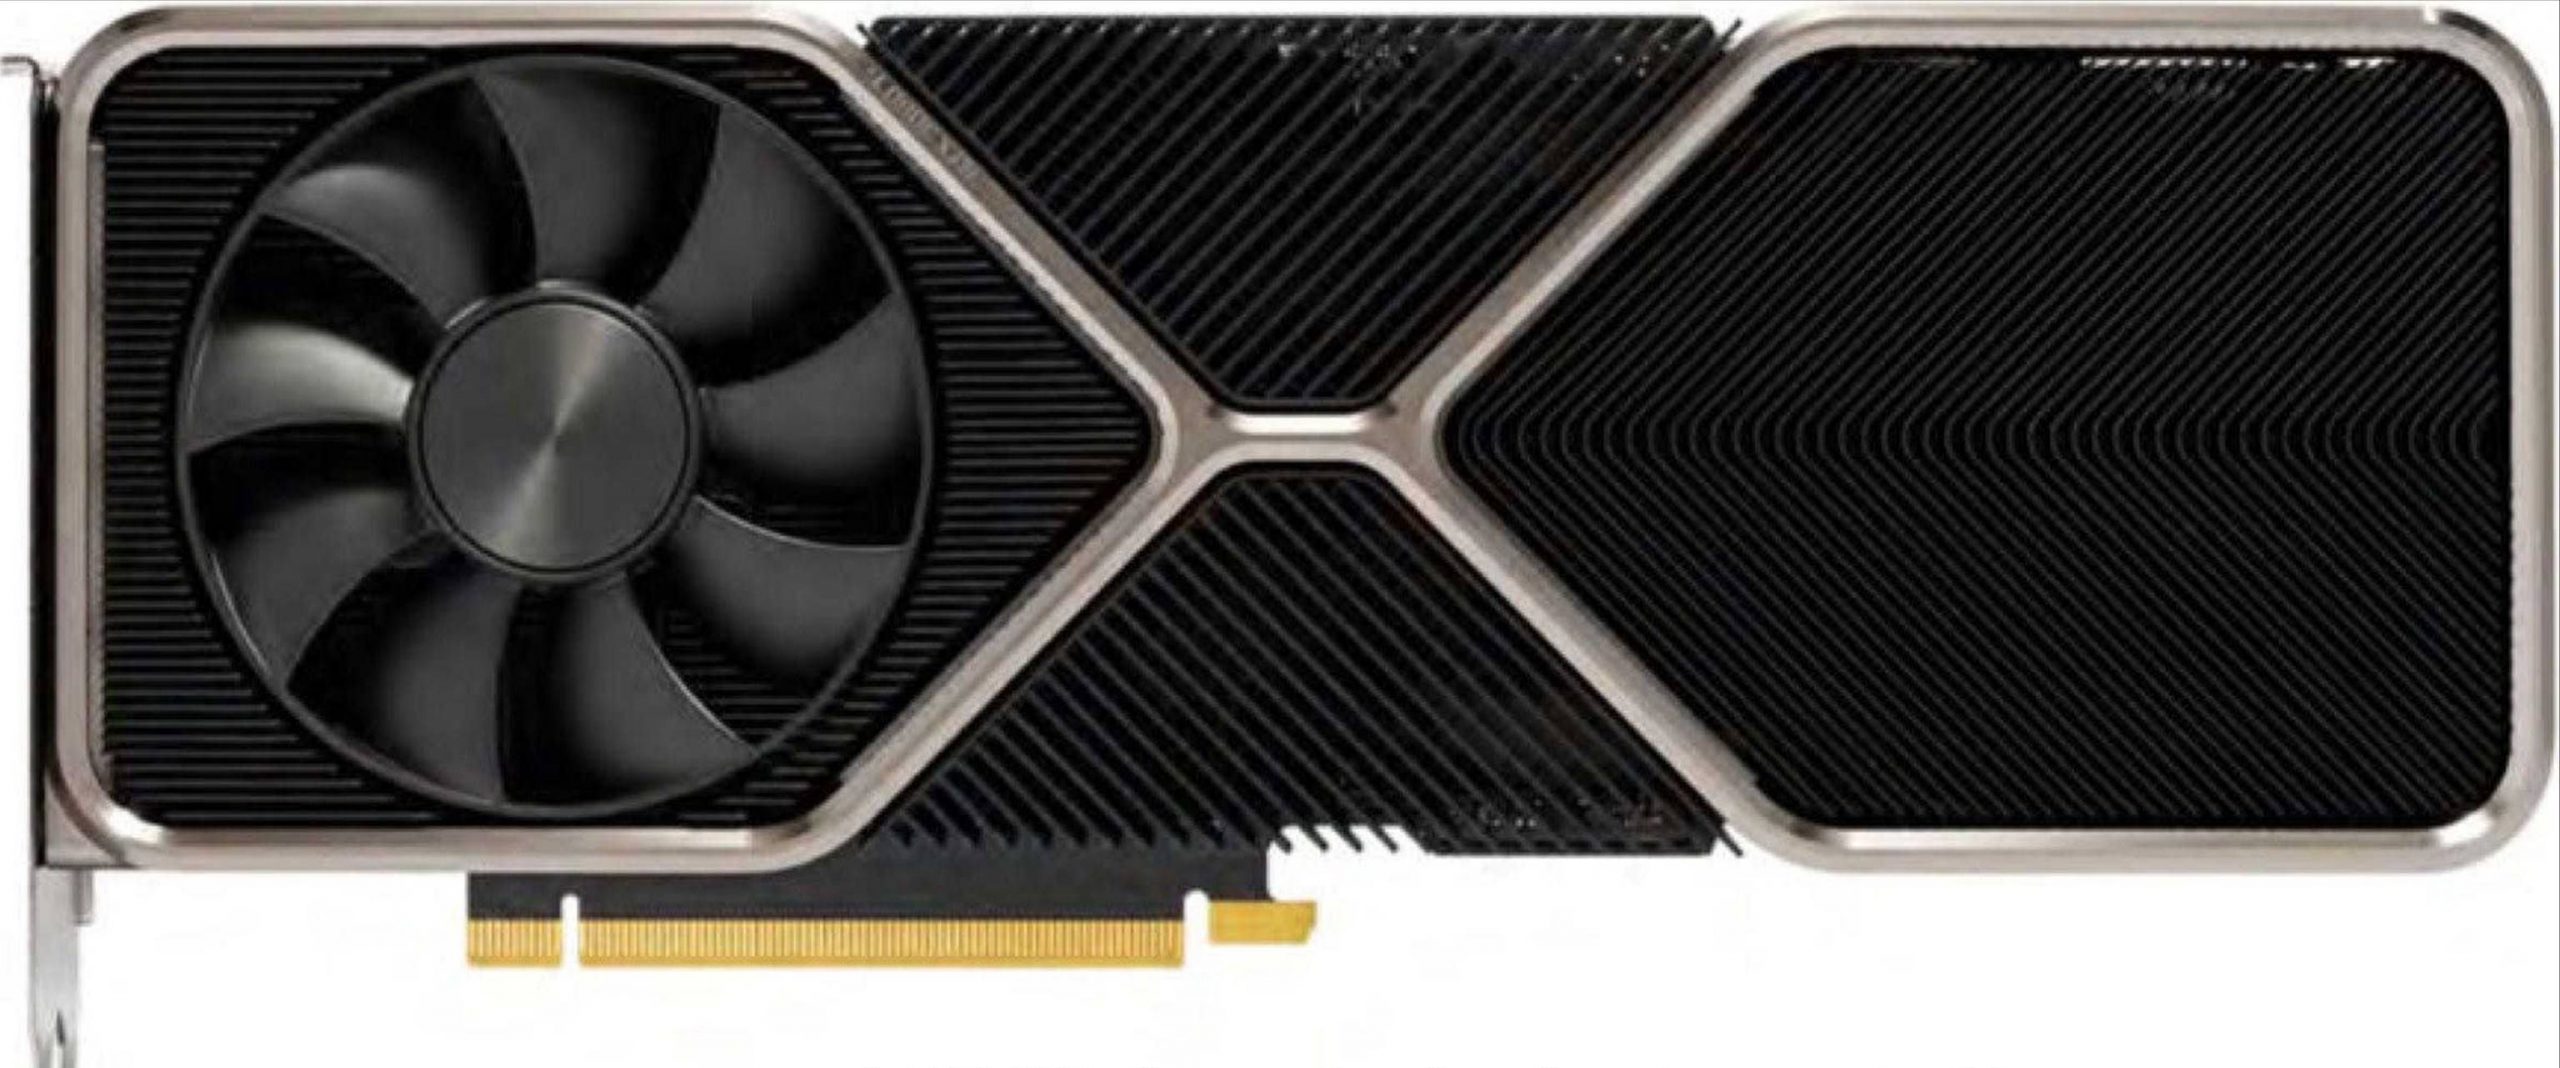 NVIDIA GEFORCE RTX 3080 Ti FE Review